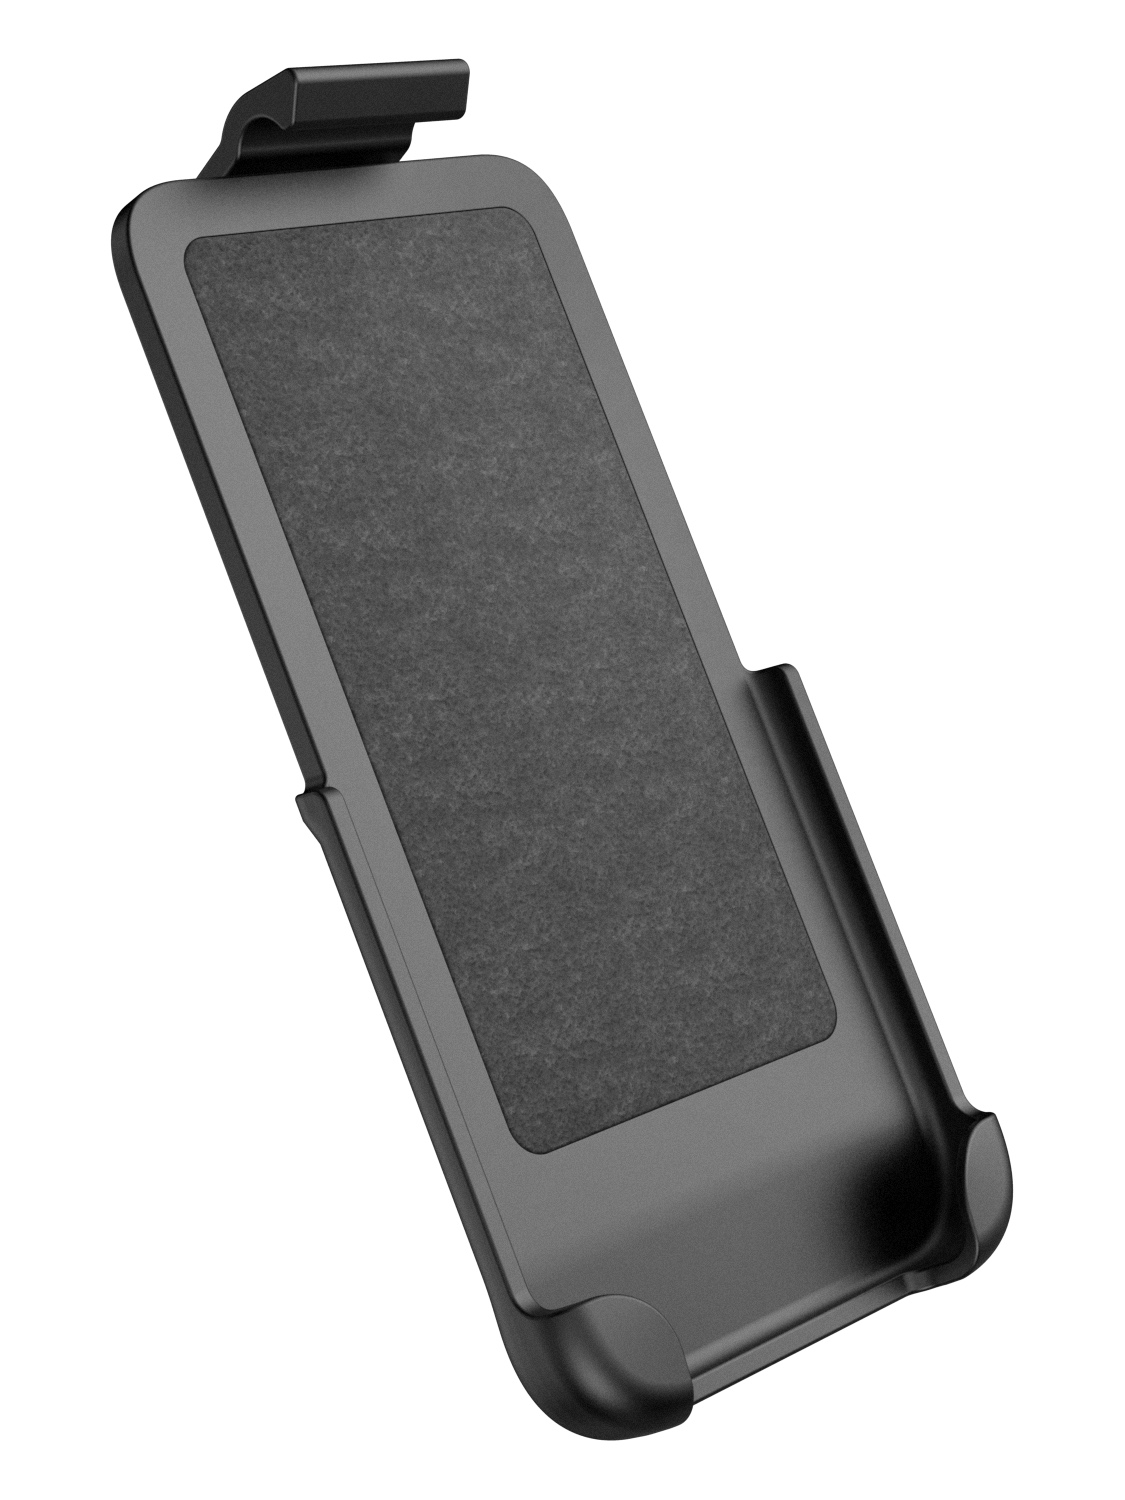 Rubberized Ribbed Texture Shell Holster Belt Clip For Iphone 4/4s (black) :  Target